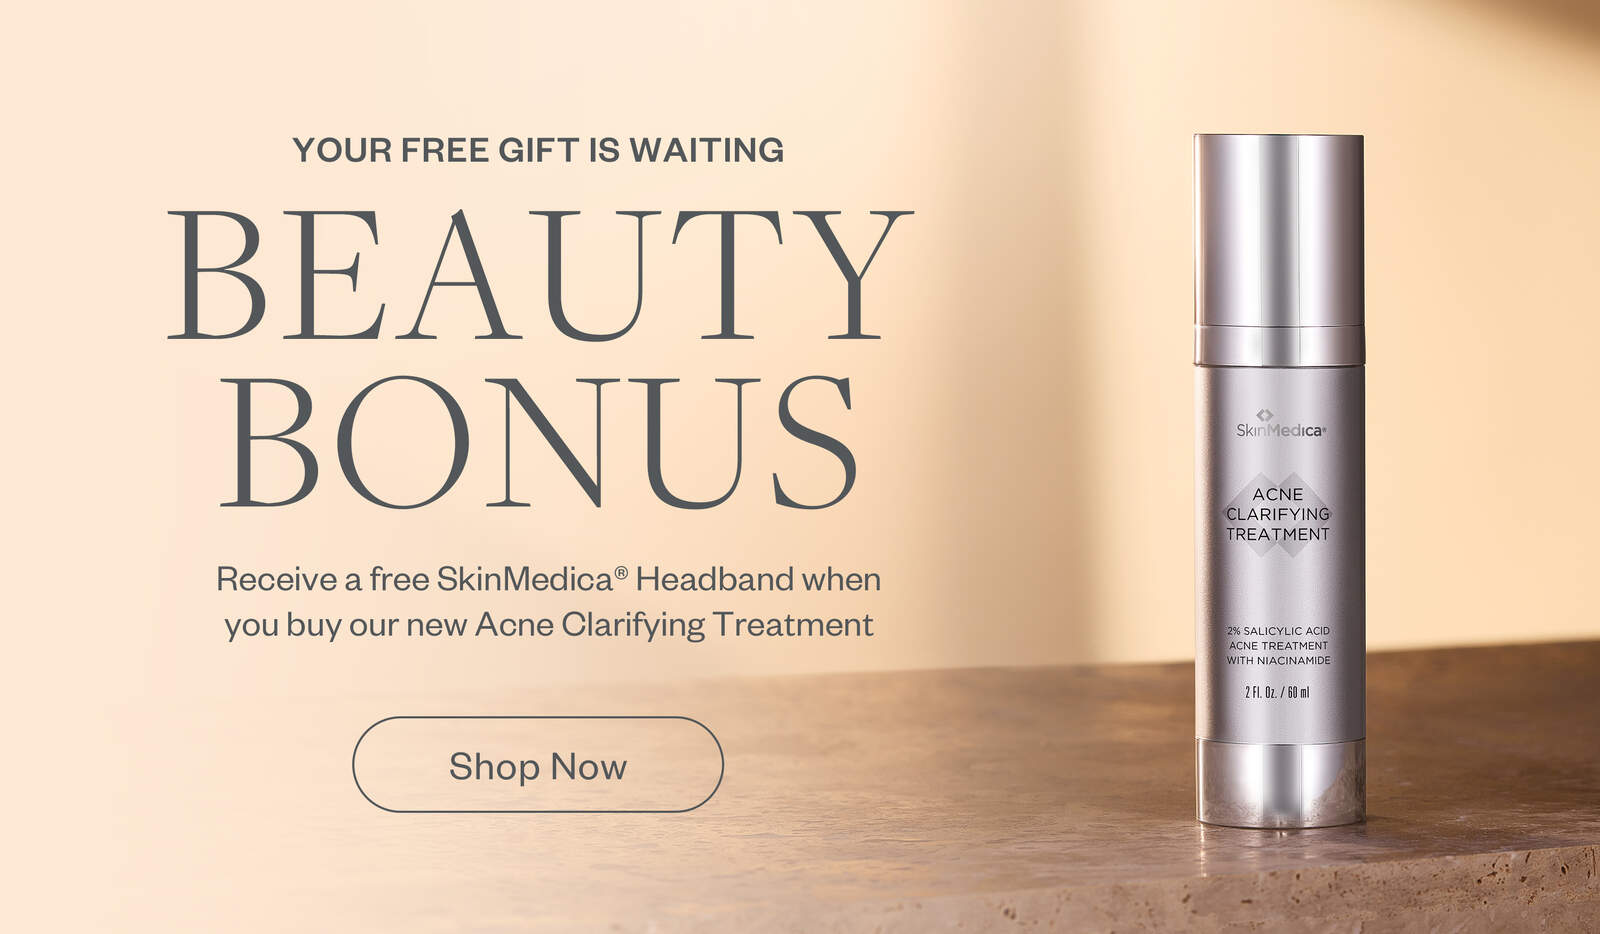 Receive a free SkinMedica Headband when you buy our new Acne Clarifying Treatment